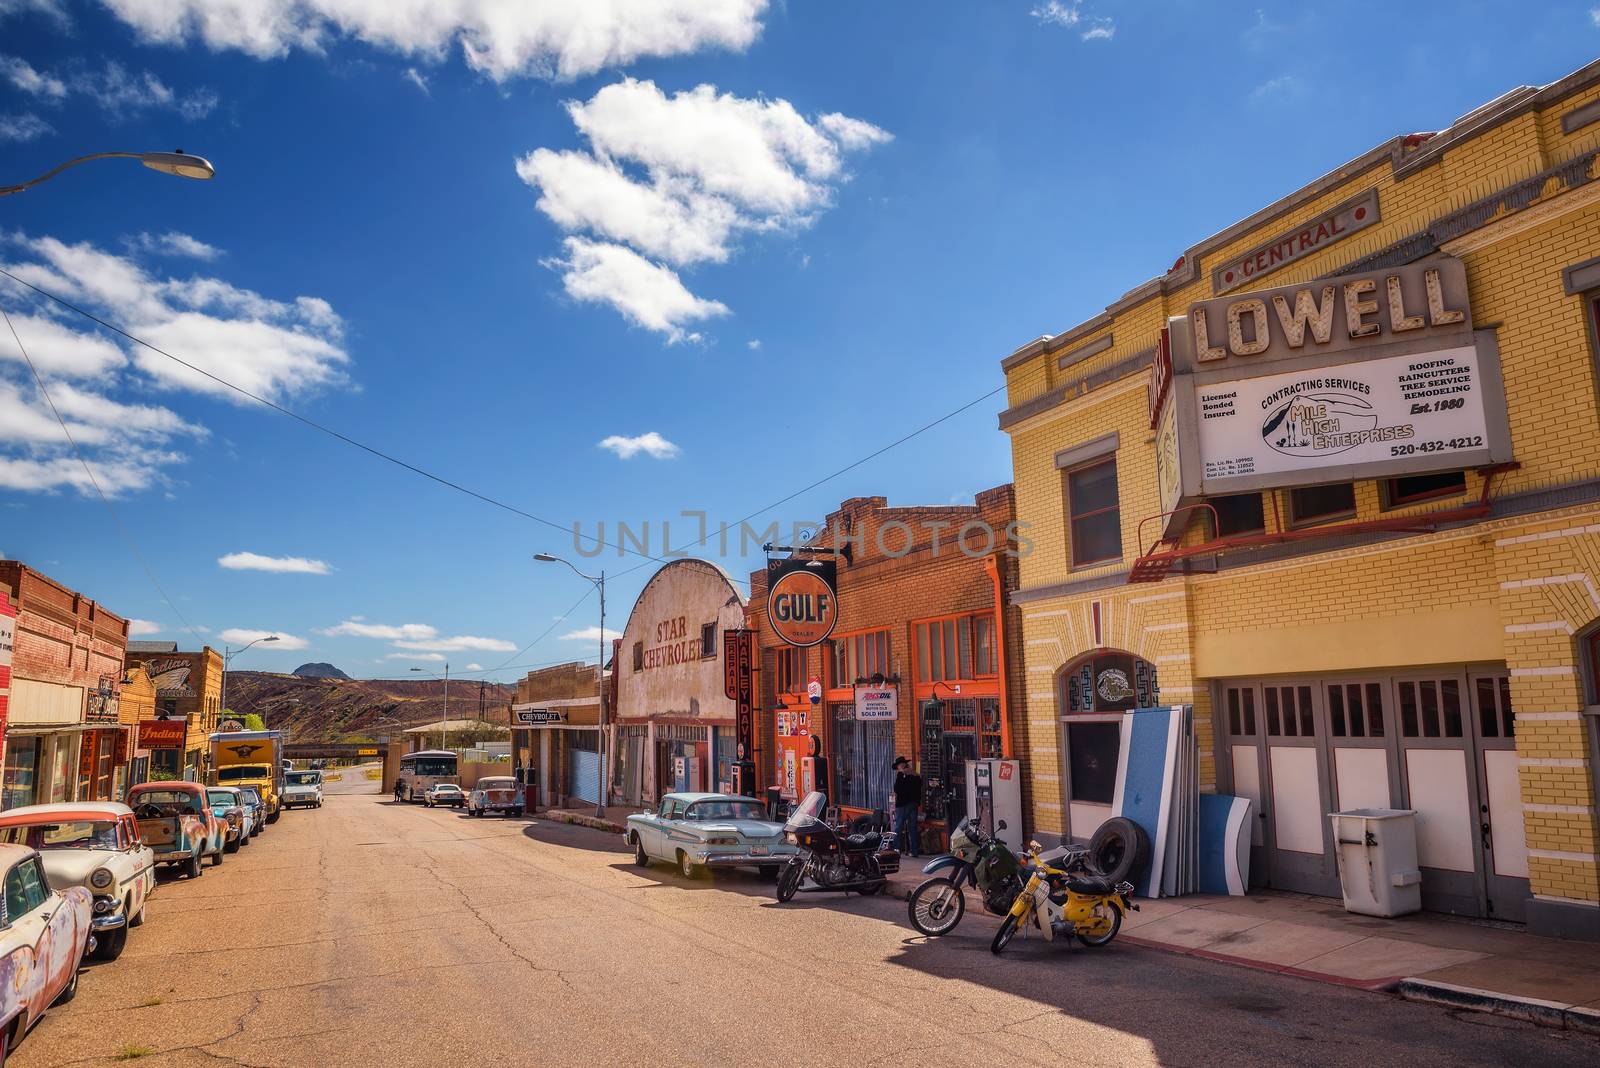 Historic Erie street in Lowell, now part of Bisbee, Arizona by nickfox